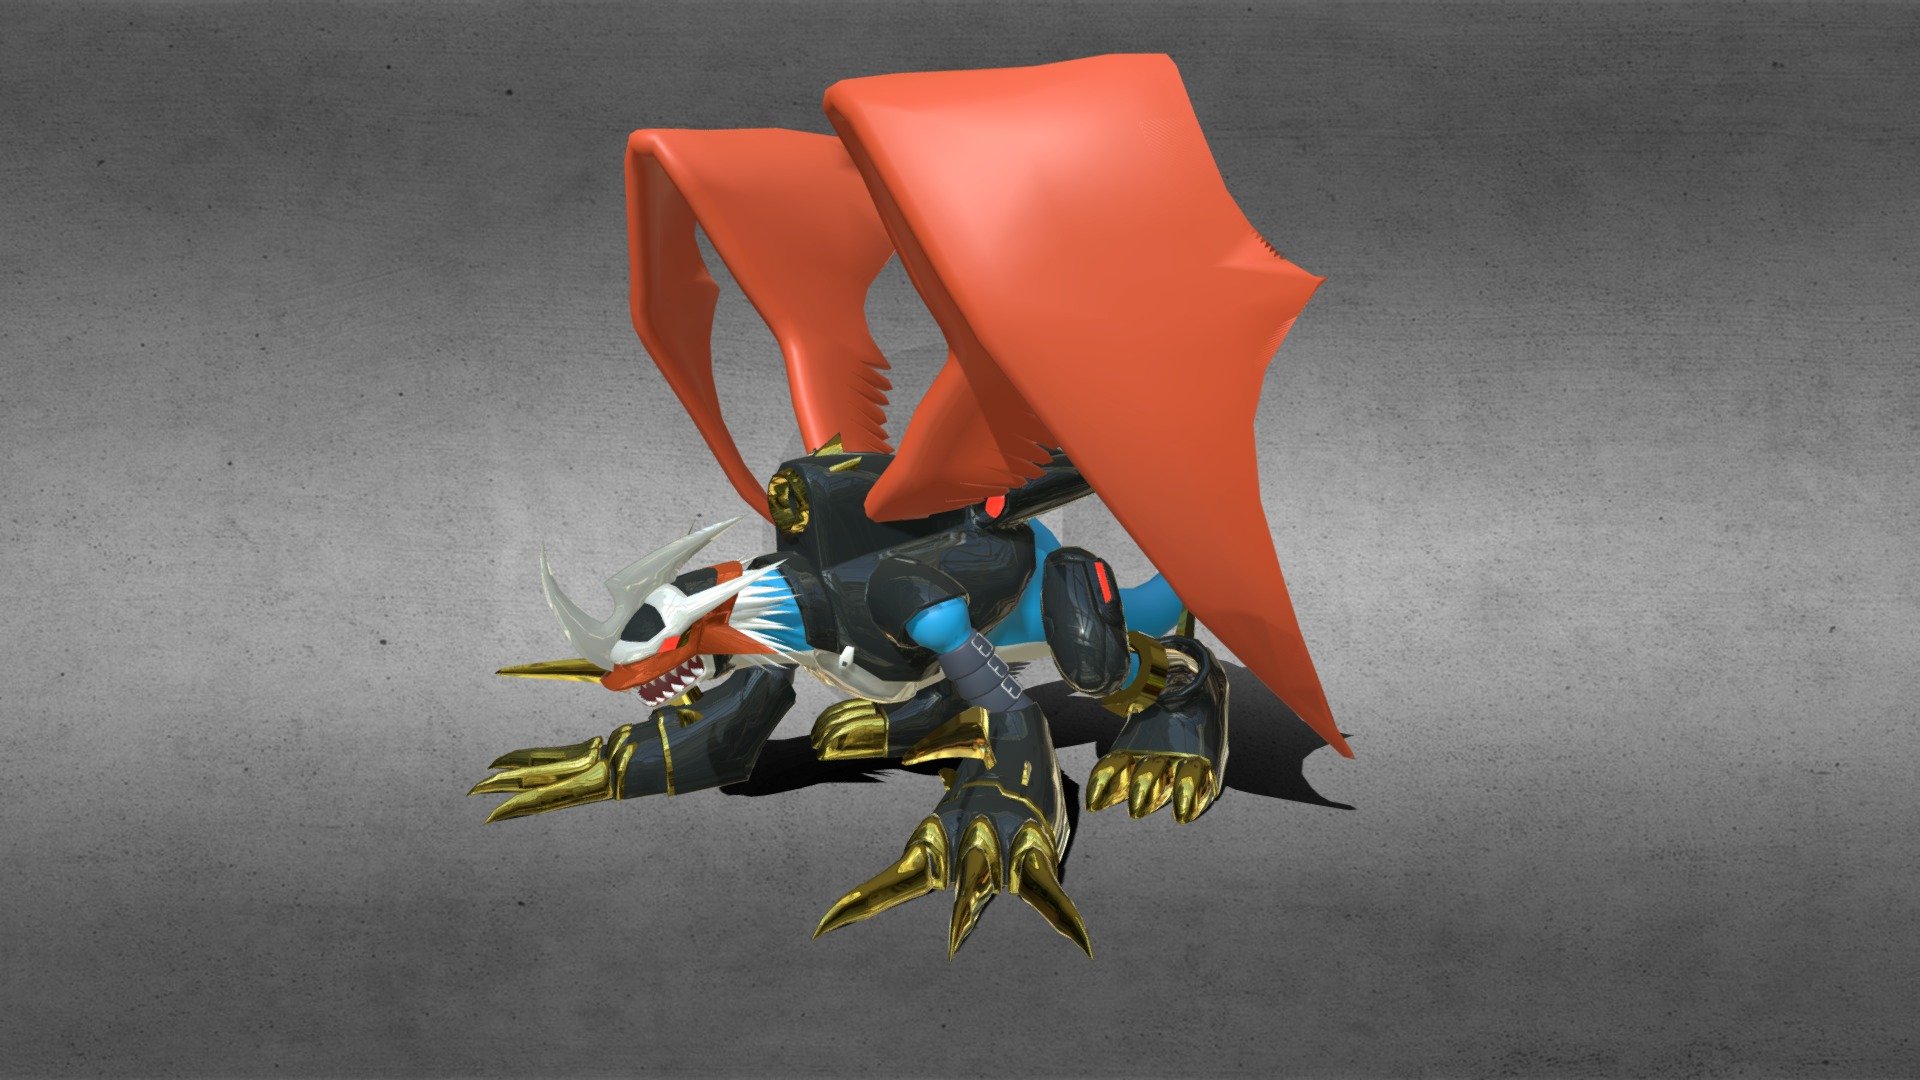 Some time ago I created this model from reference images to learn Blender and modelling. Since then I use it experimenting around together with other models. This is a game type model of roughly 24k triangles with only materials, no textures.

Legal Disclaimer: Copyright Digimon by Bandai / Toei Animations 3d model